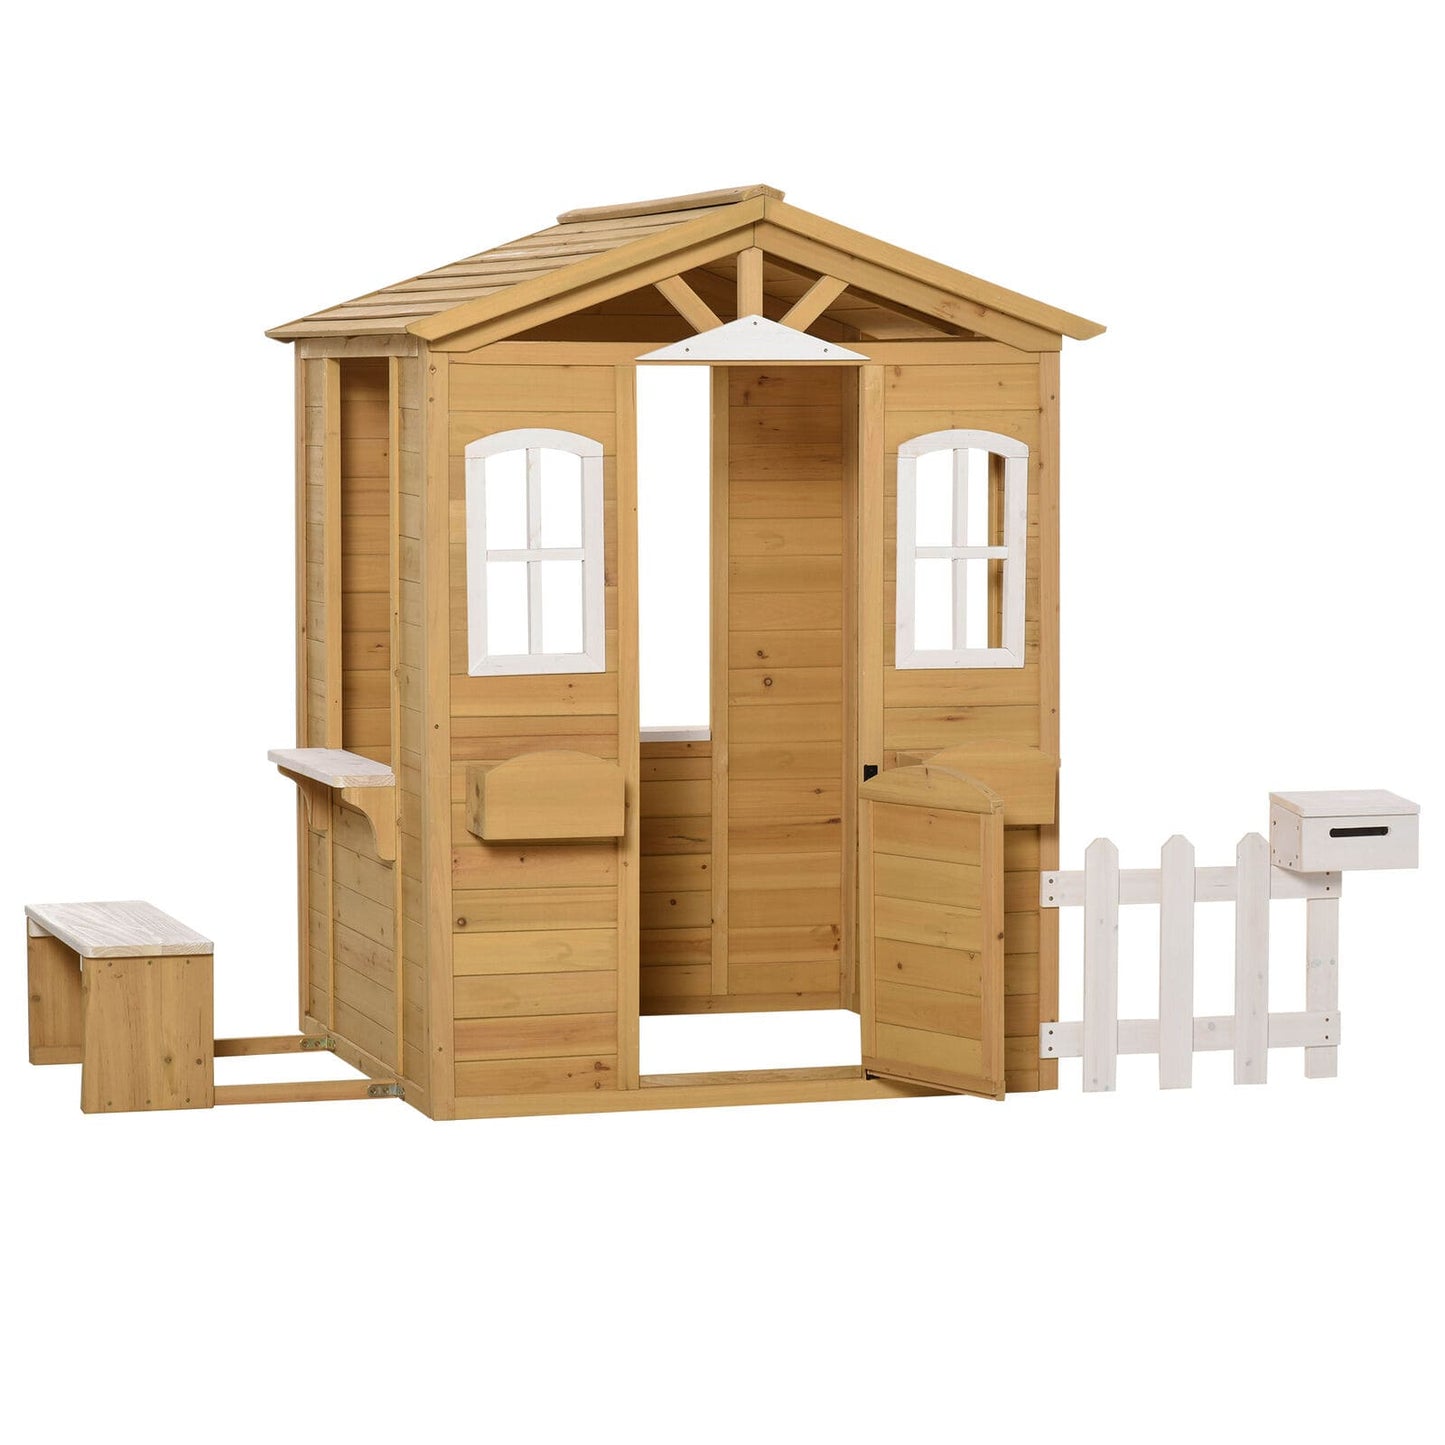 Kids Outdoor Playhouse with Fence and Serving Station - Kids Wooden Playhouse - Playhouse for Kids Toddler